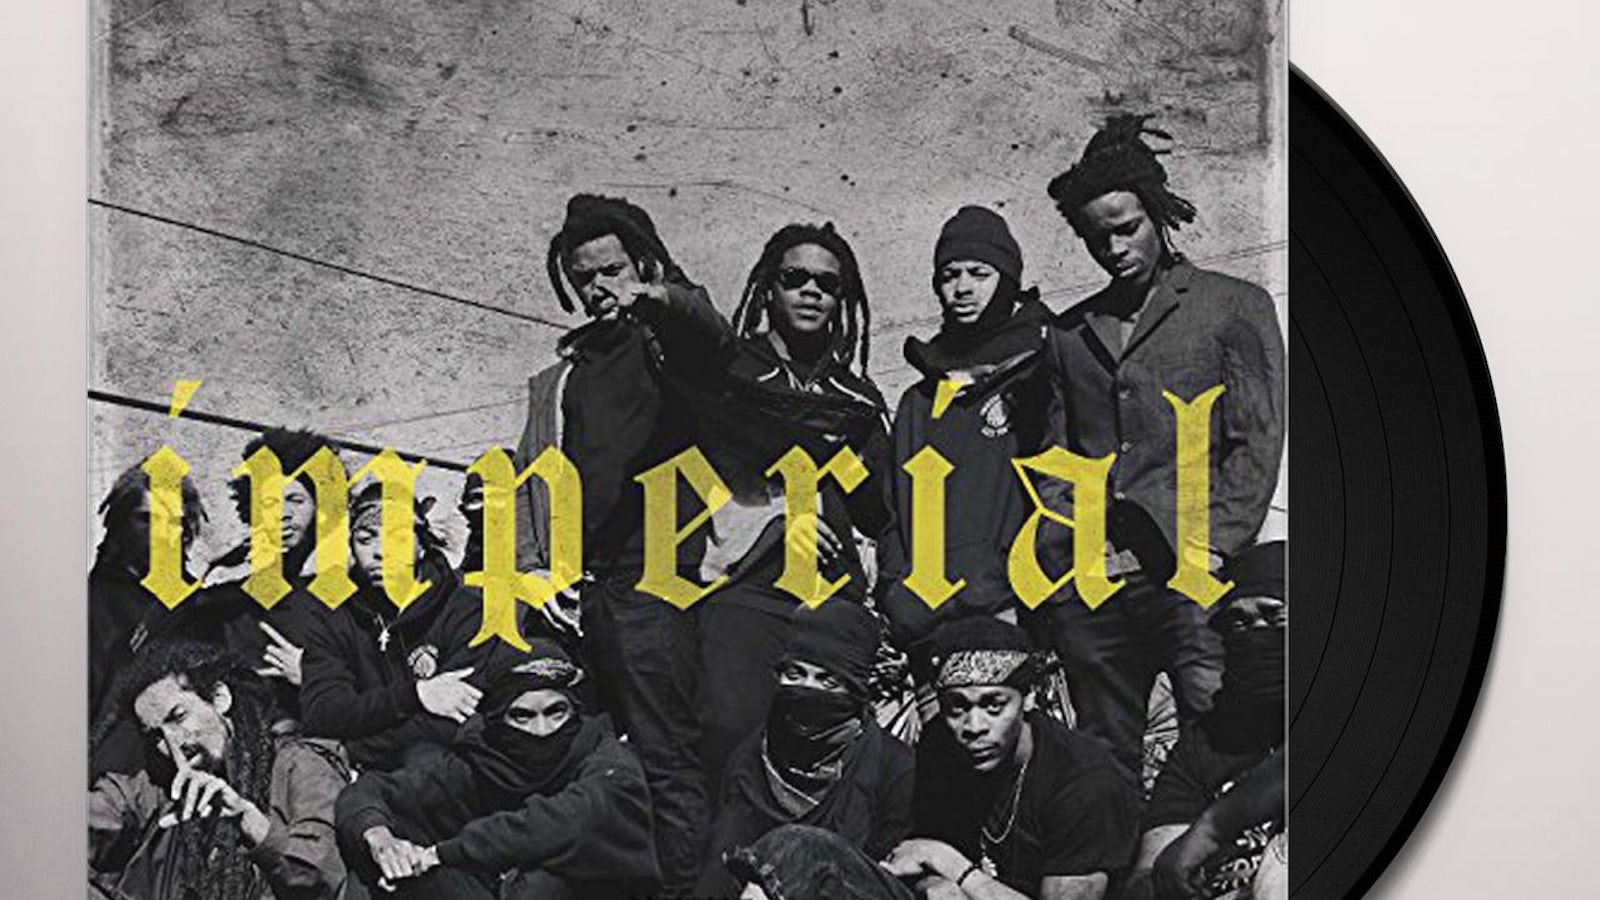 Imperial Denzel Curry Download Wallpapers